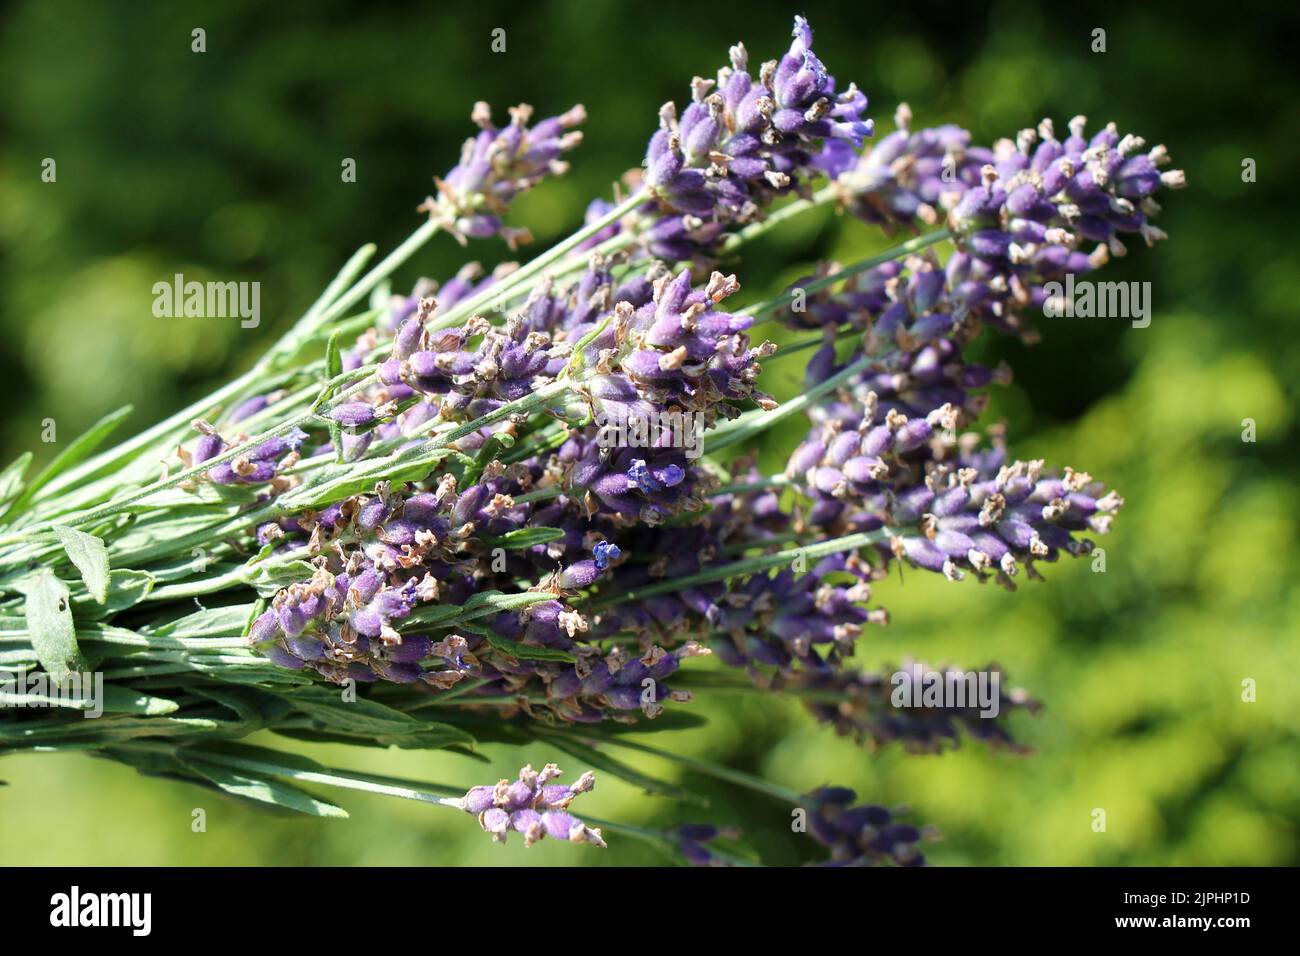 Bunch of fresh lavender flowers on natural green defocused background. Stock Photo